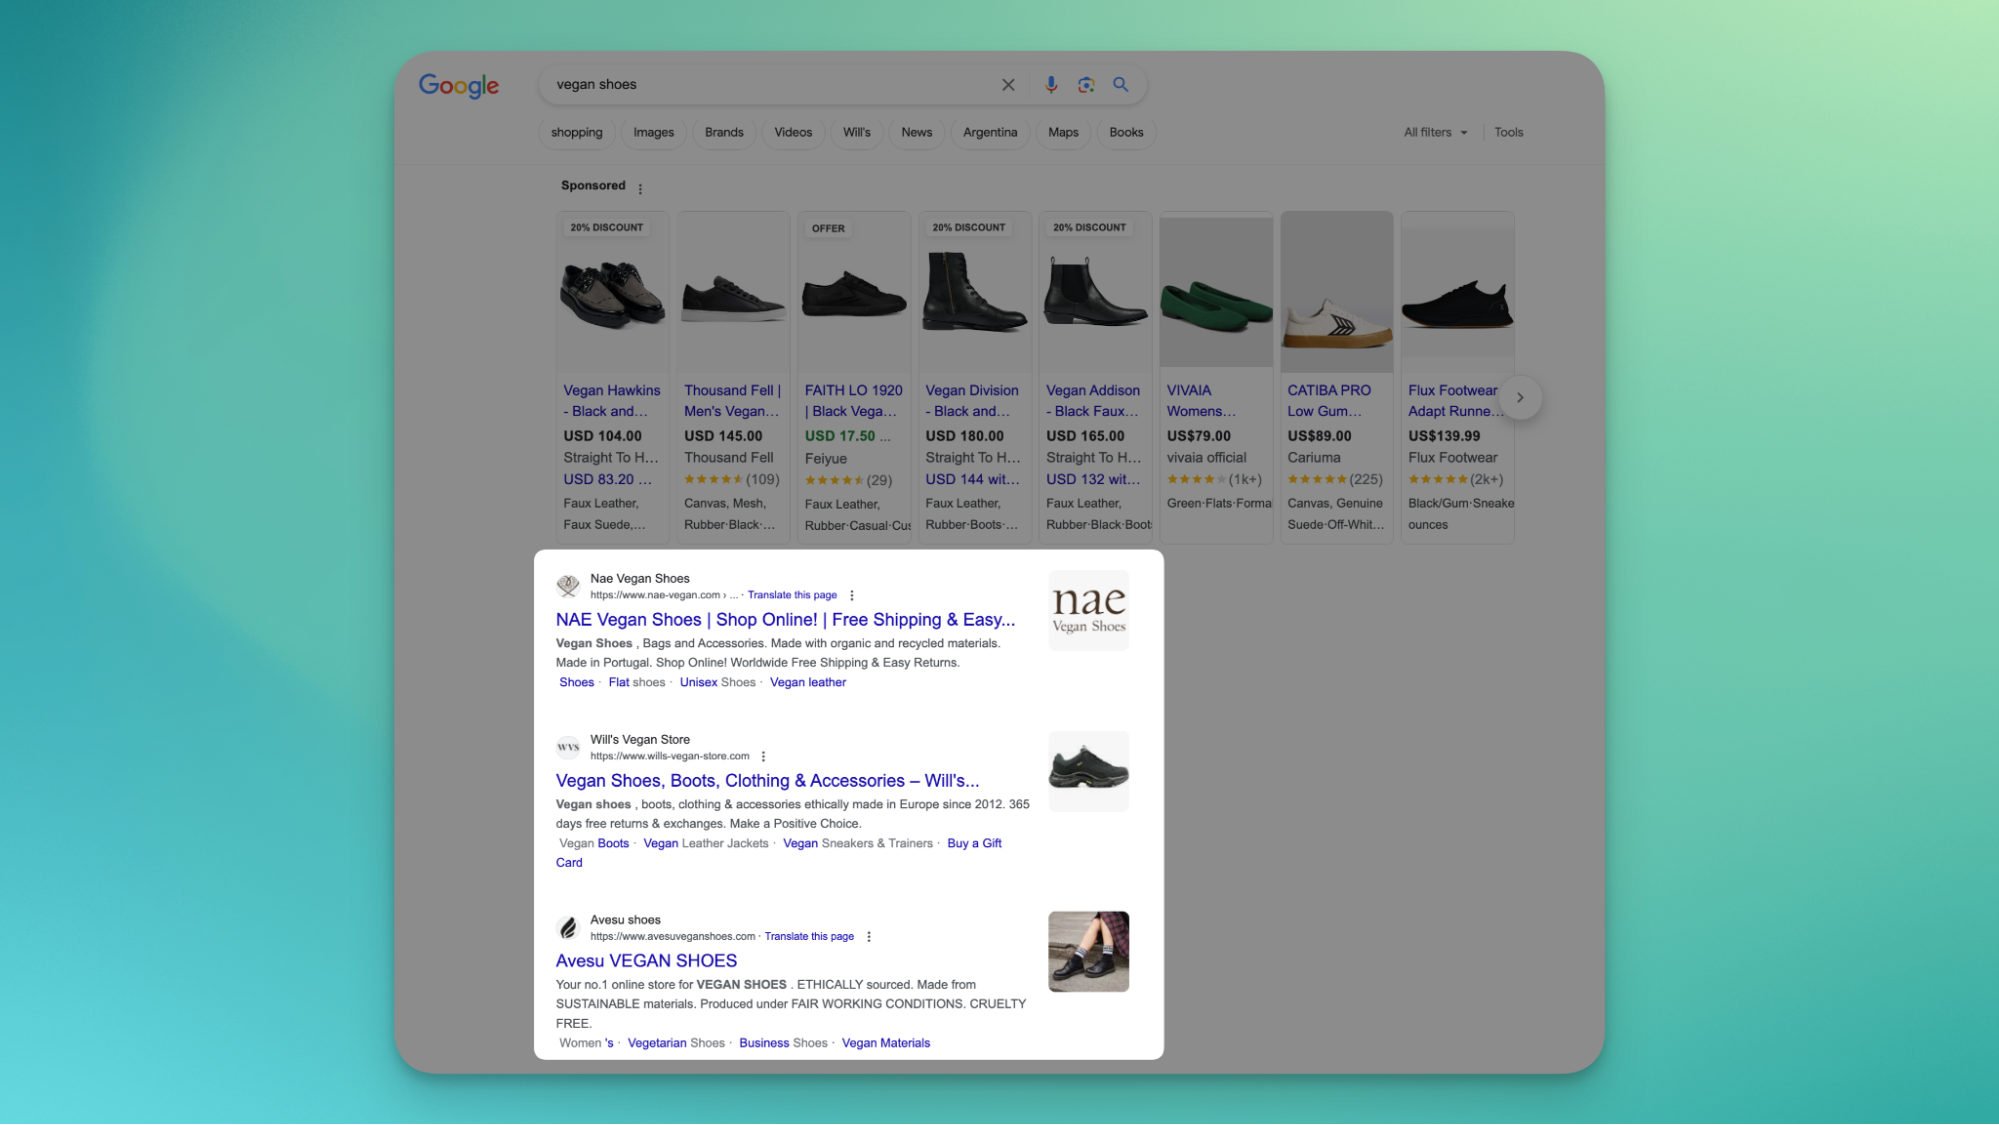 Organic search results for the query “vegan shoes” on Google